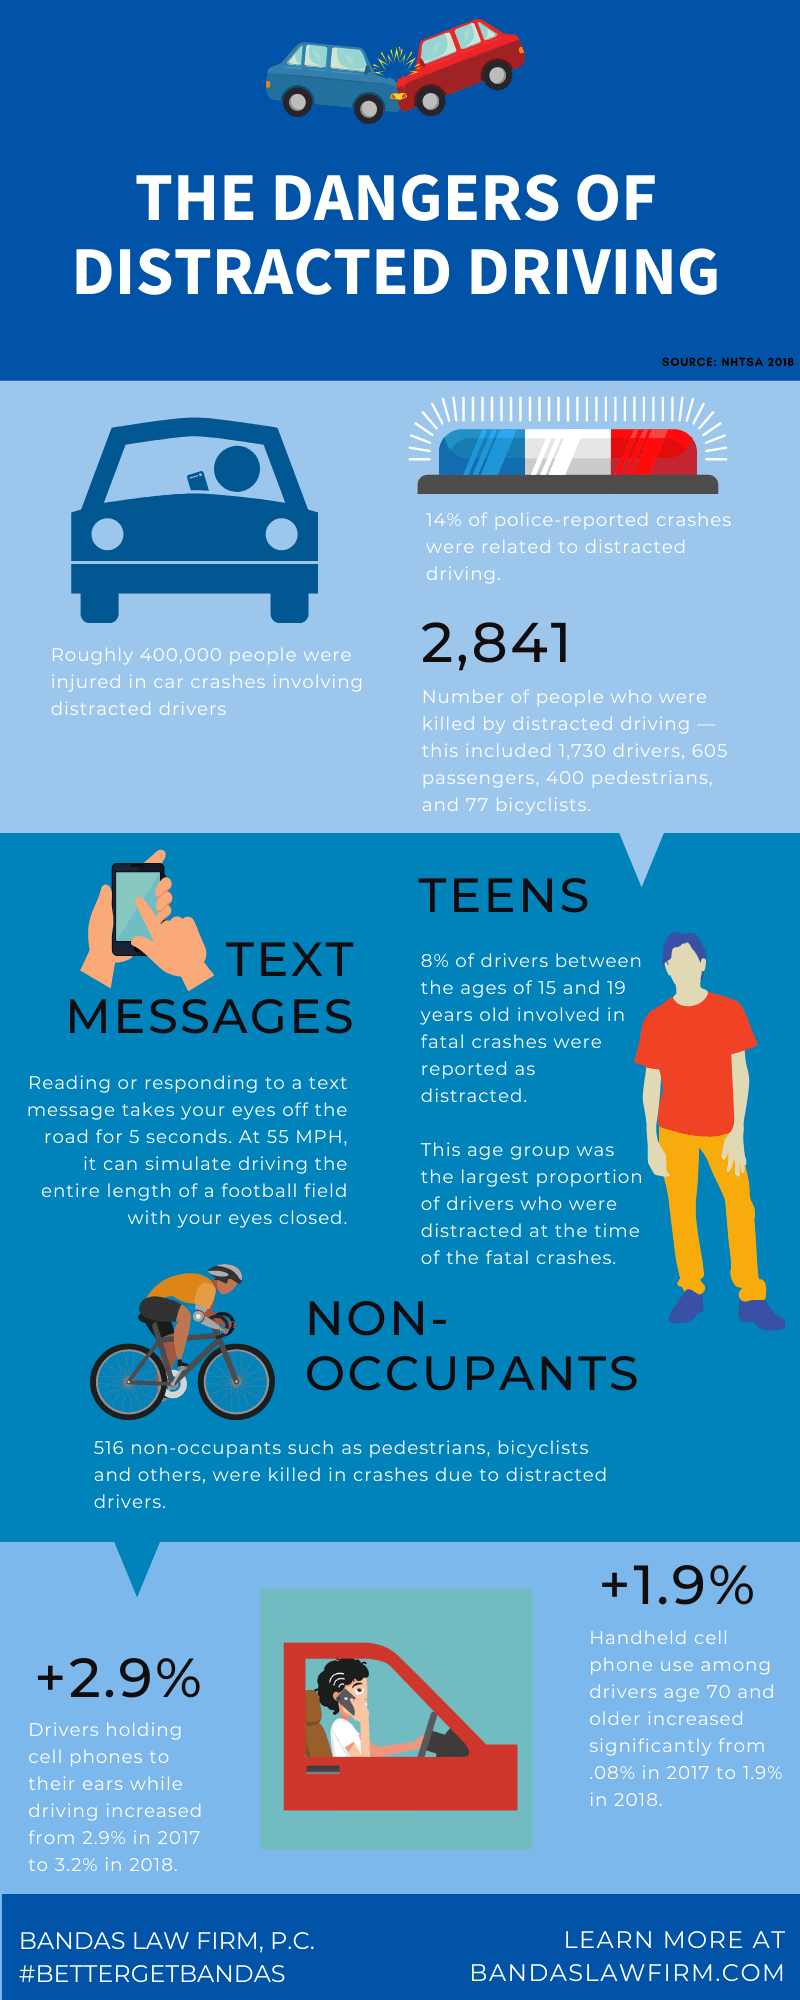 The Dangers of Distracted Driving infographic